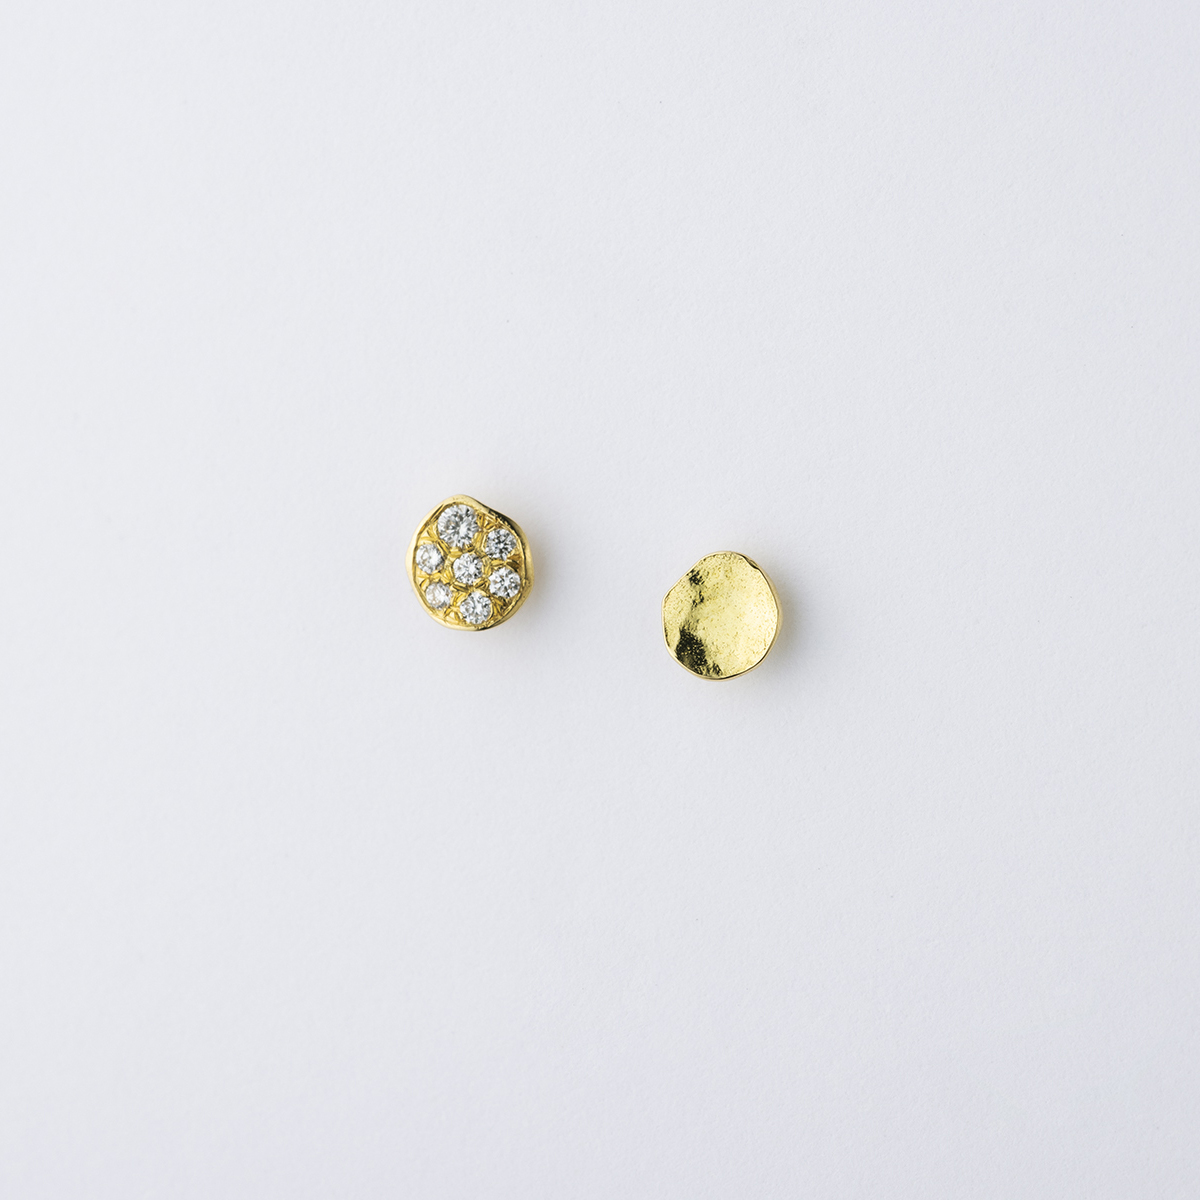 PRK COIN PAVE EARRINGS